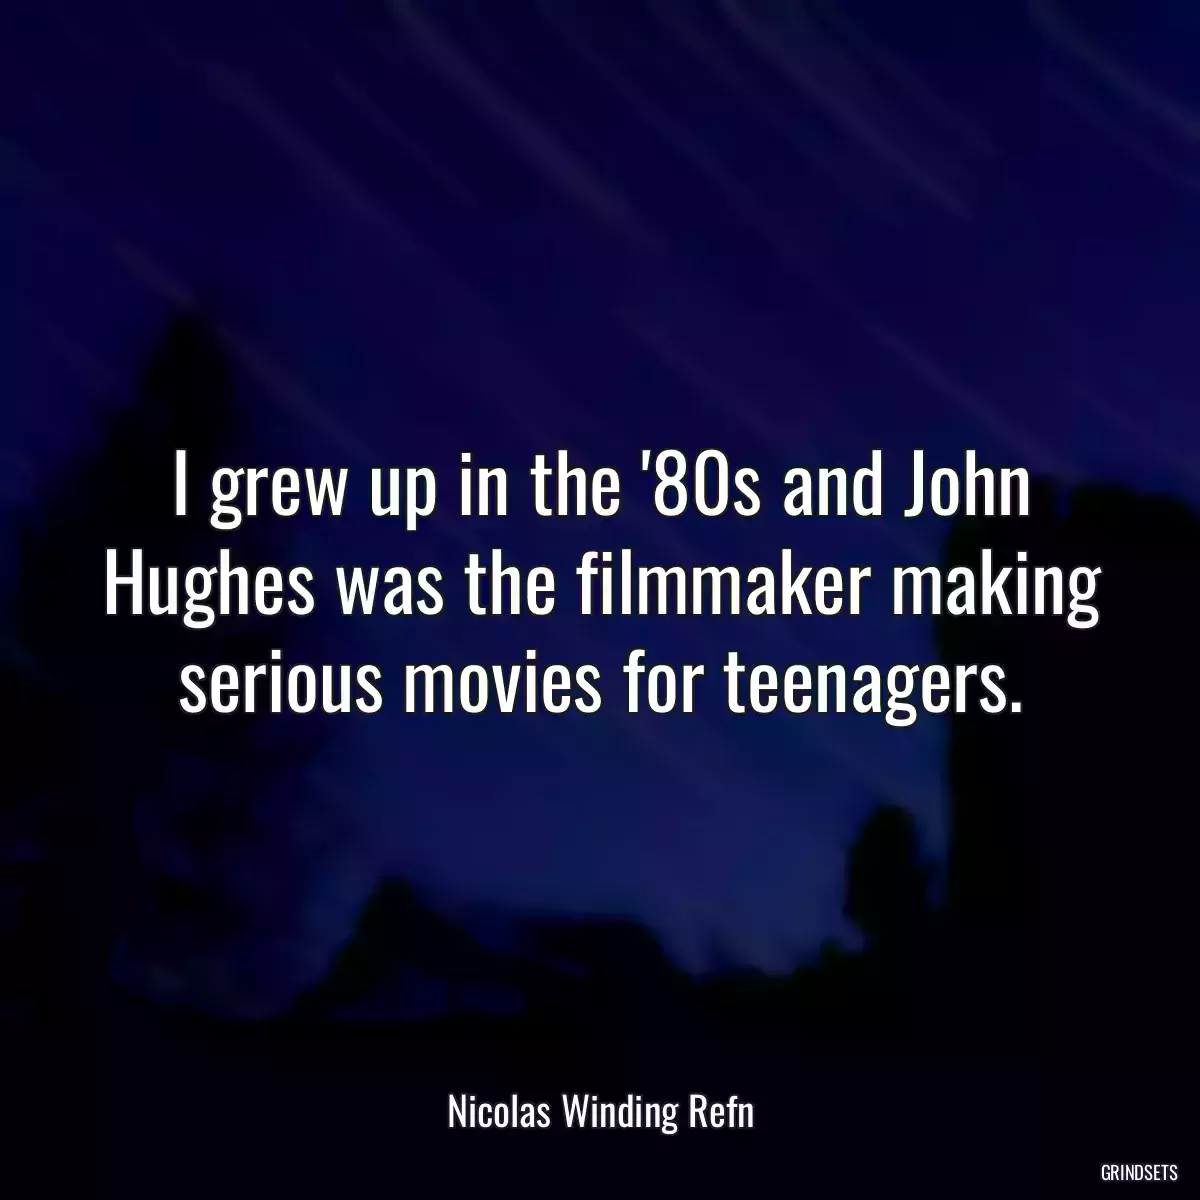 I grew up in the \'80s and John Hughes was the filmmaker making serious movies for teenagers.